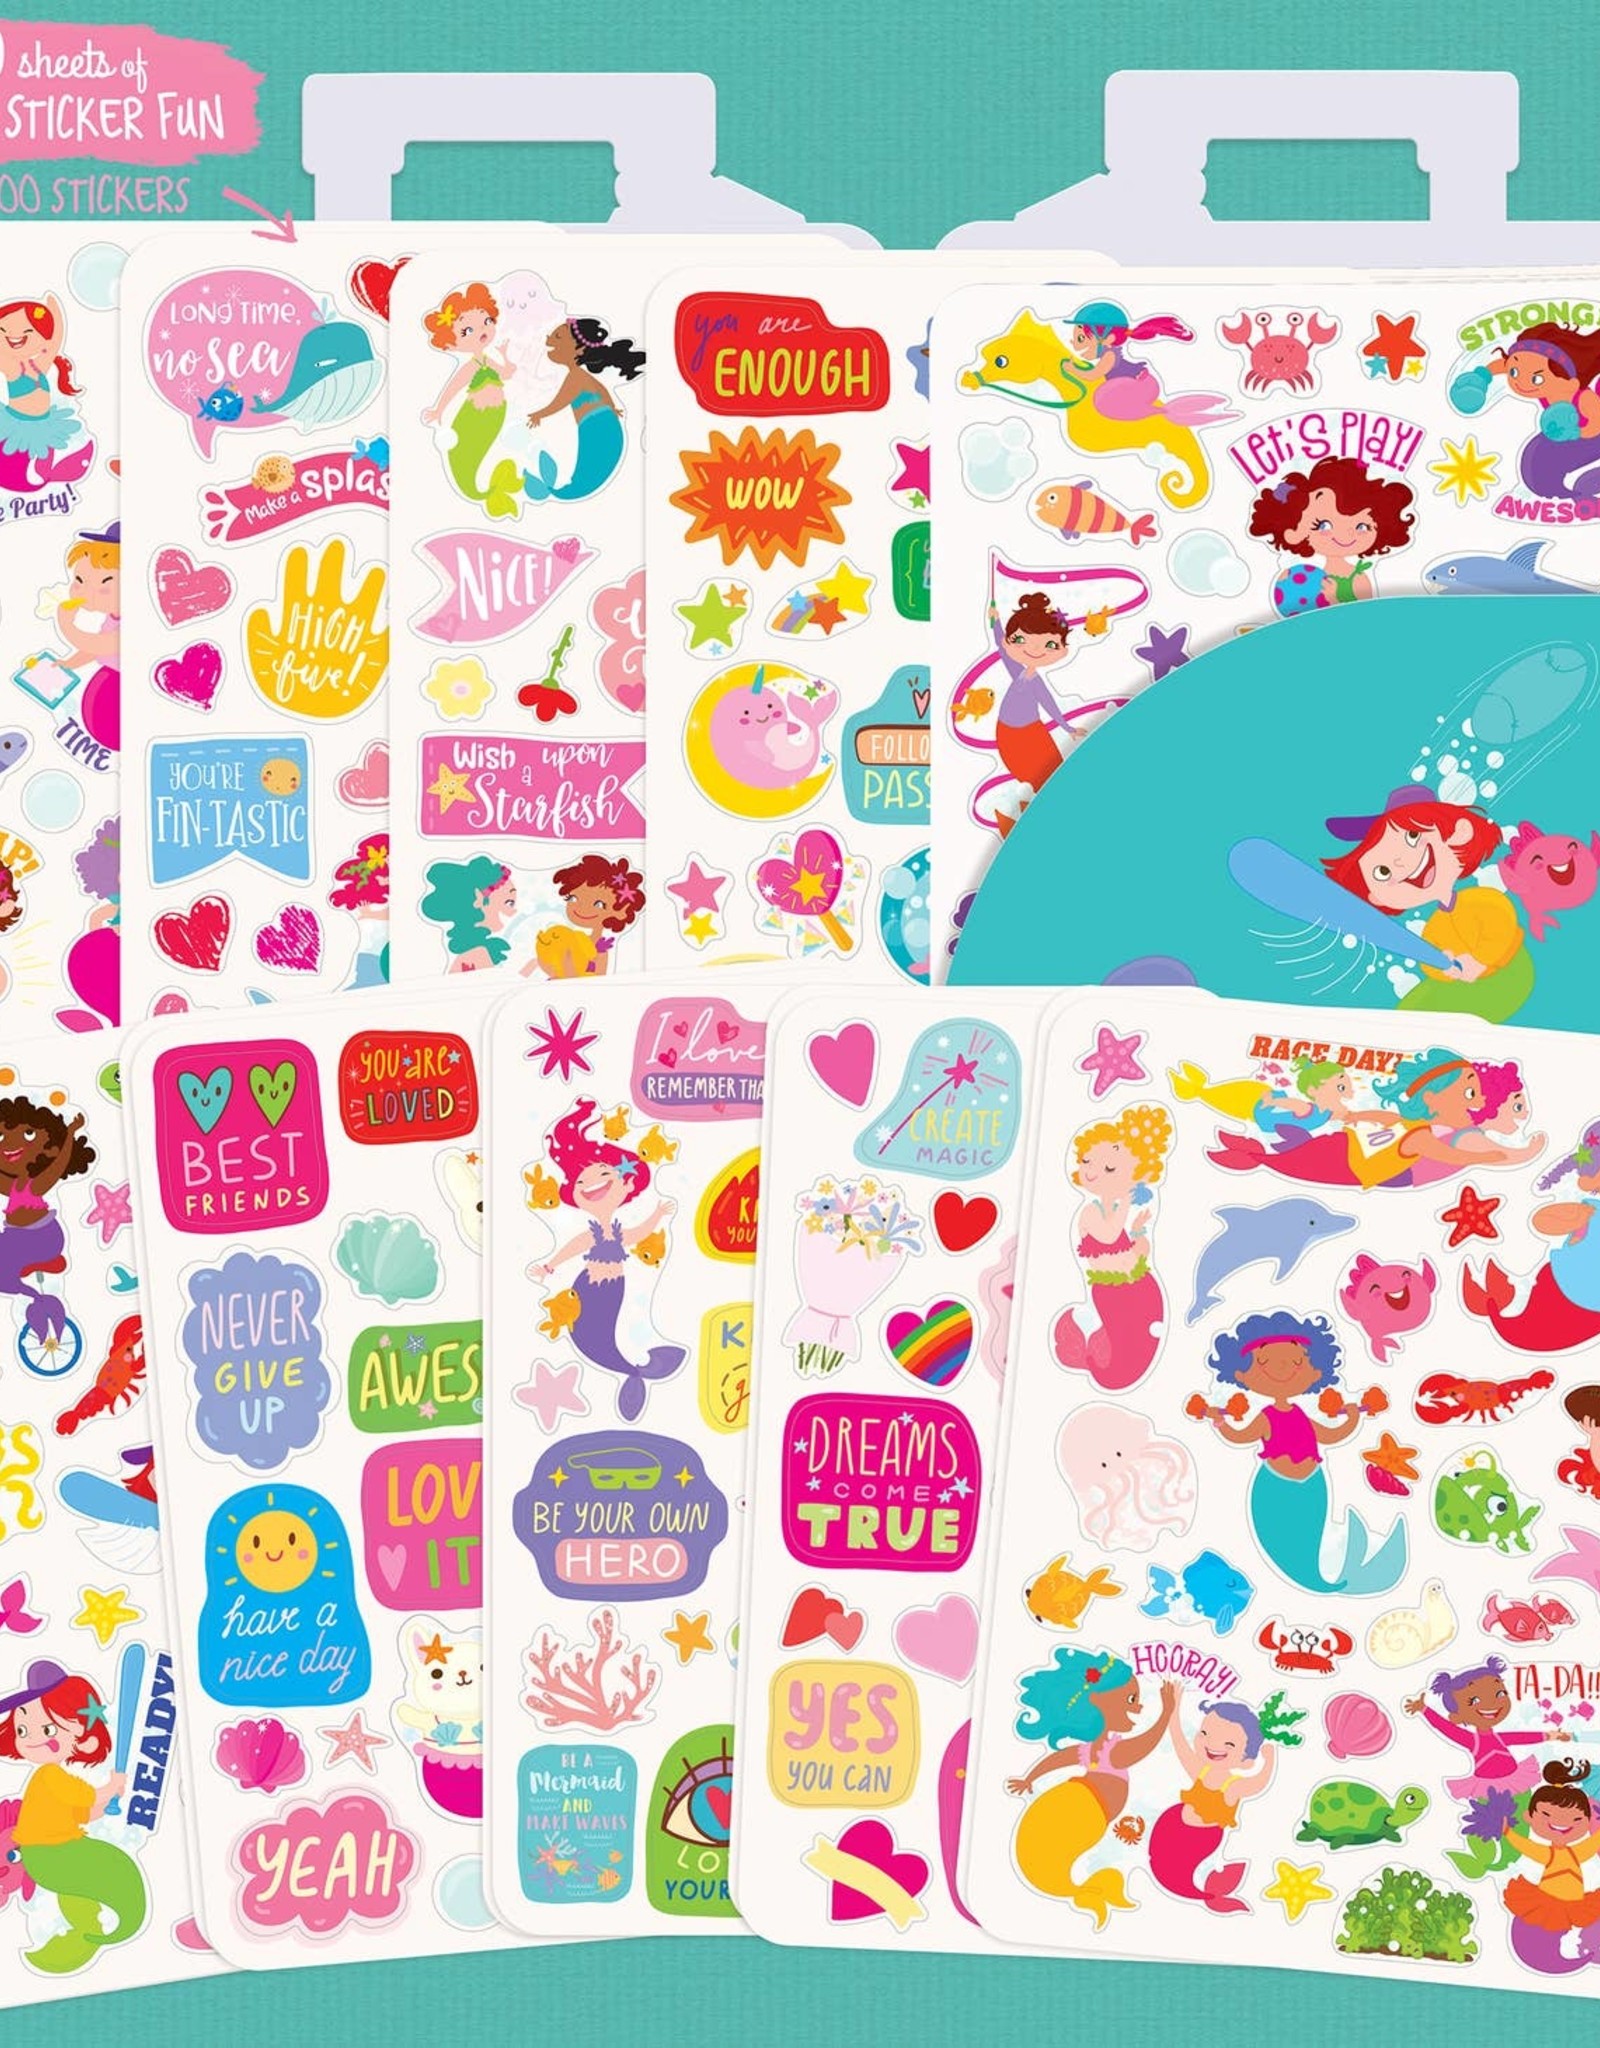 The Piggy Story 500+ Stickers On-The-Go Mermaids